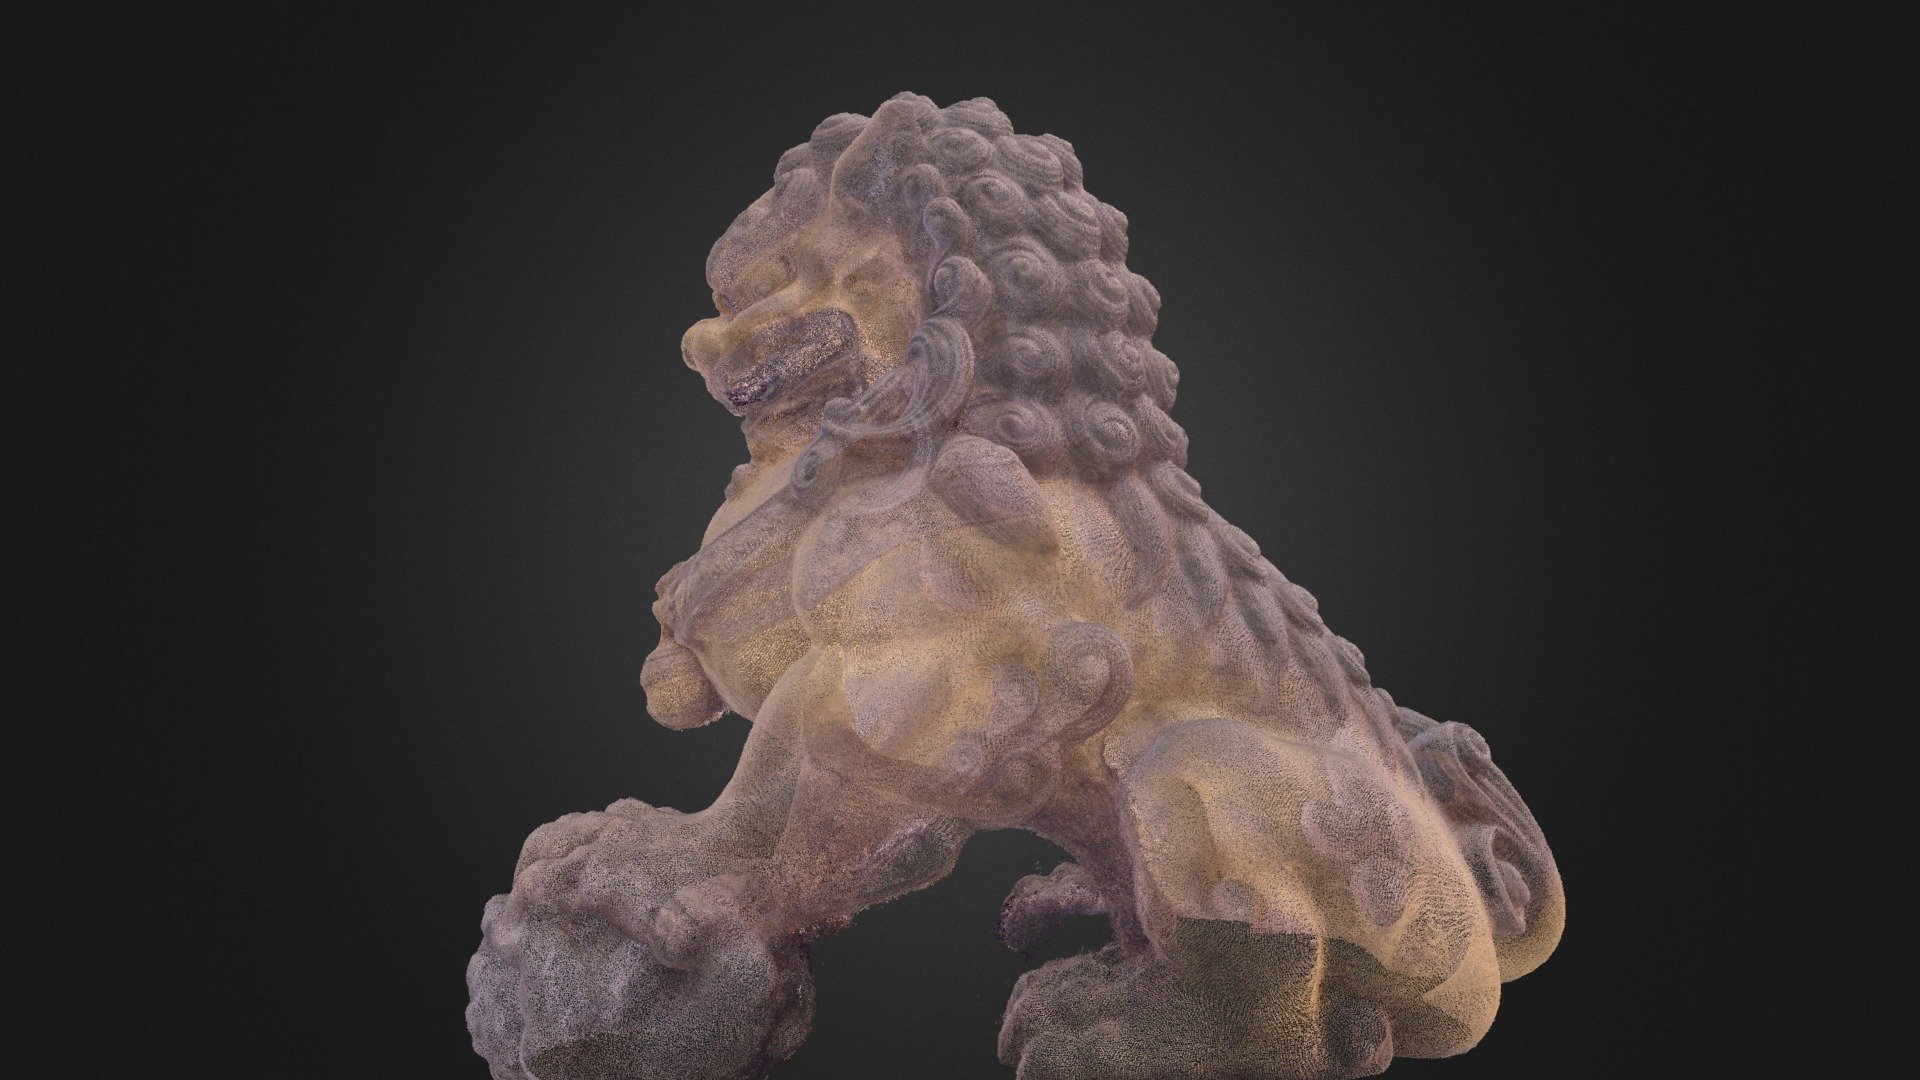 Chinese-style bronze lion statue / Point Cloud